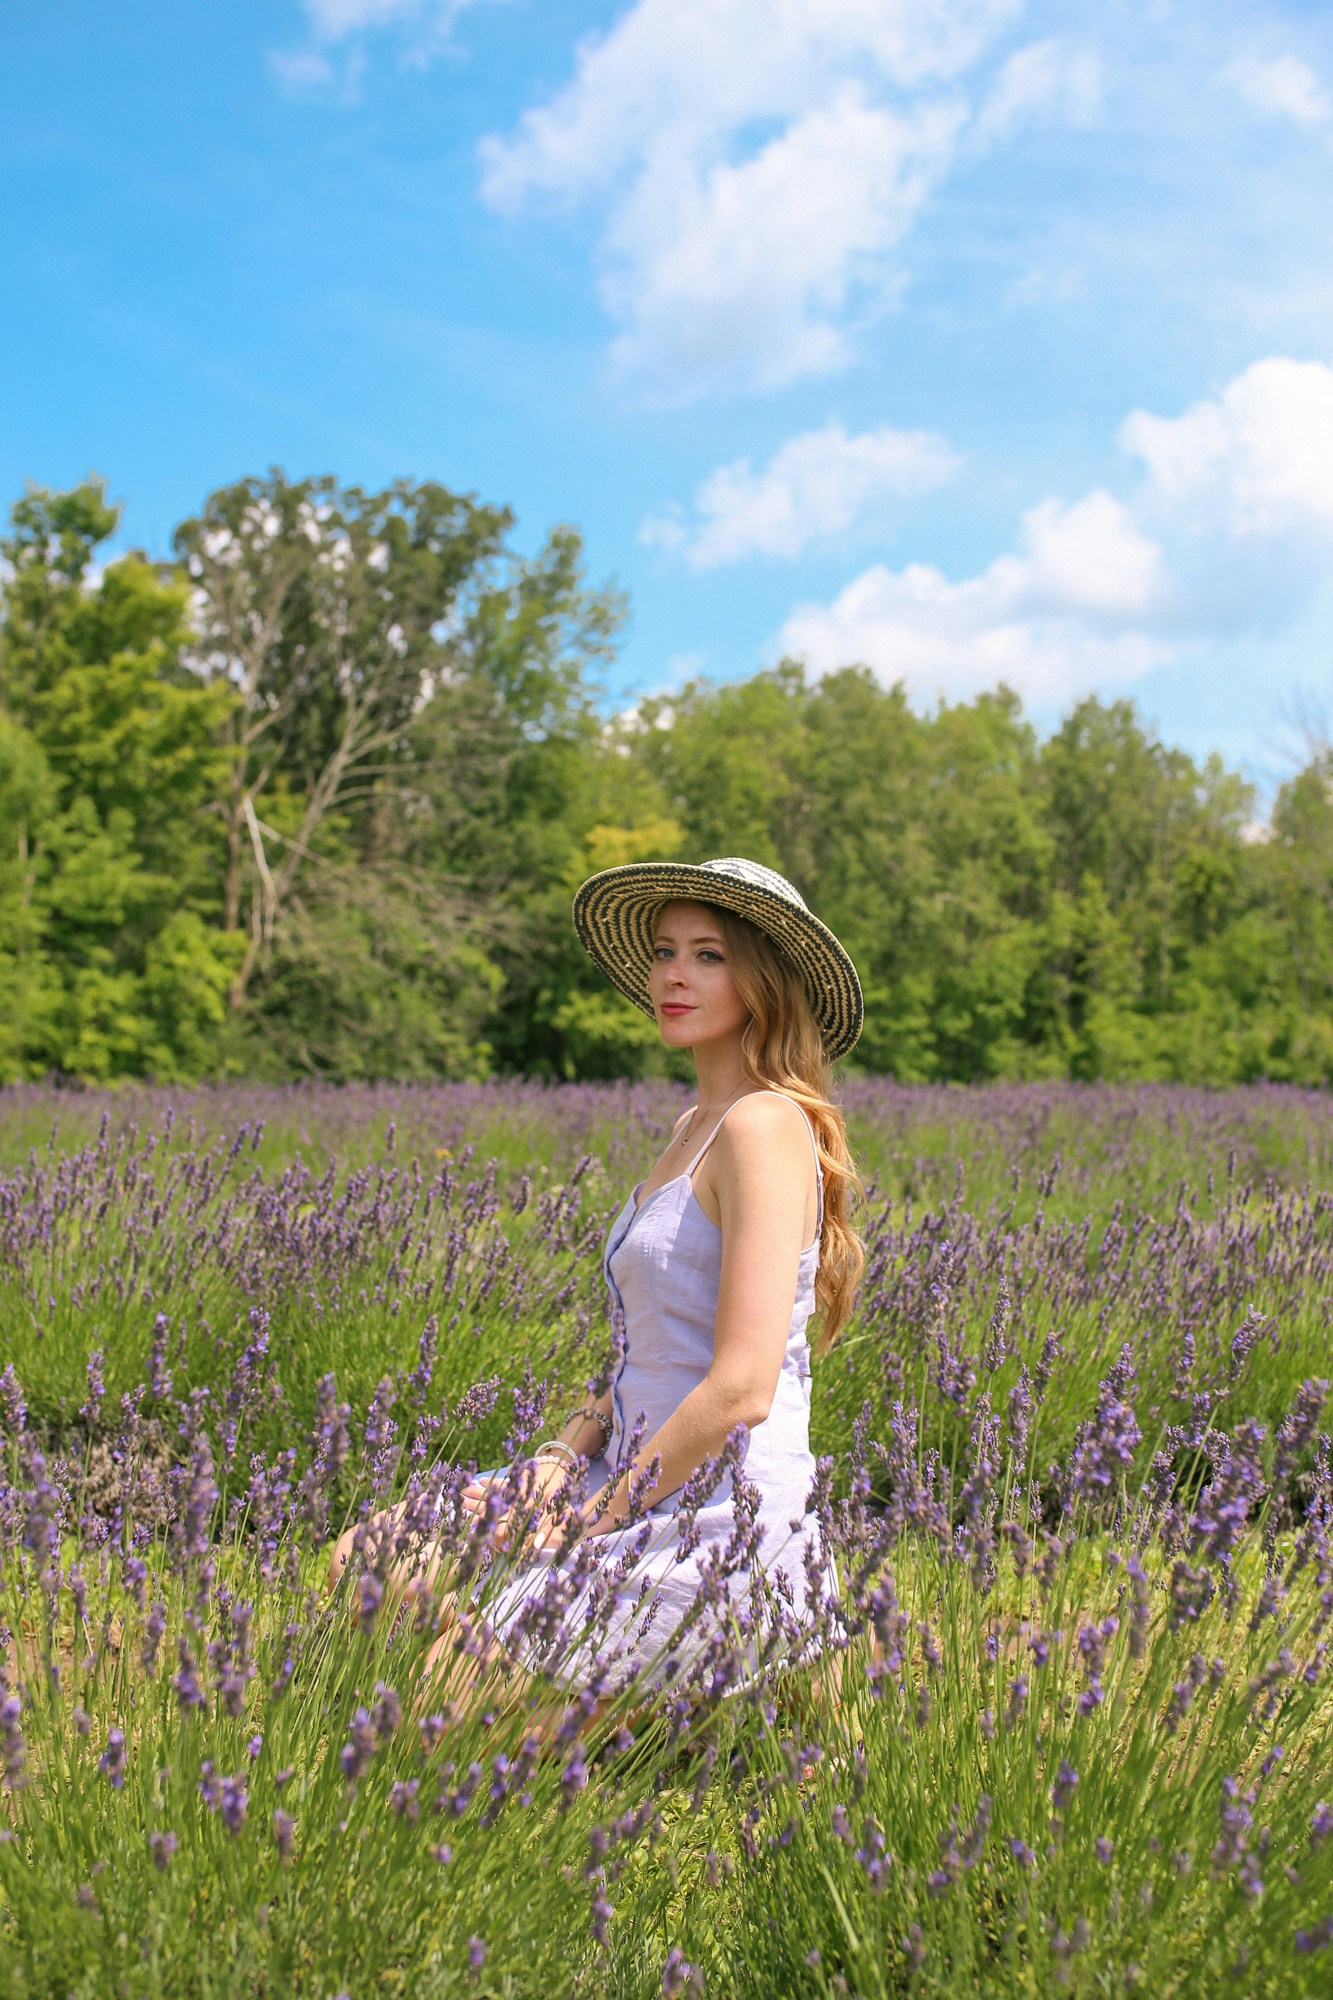 Straw hat and purple linen dress from Urban Outfitters | What to wear to a Lavender field - stay cool in a light linen dress and sunhat.